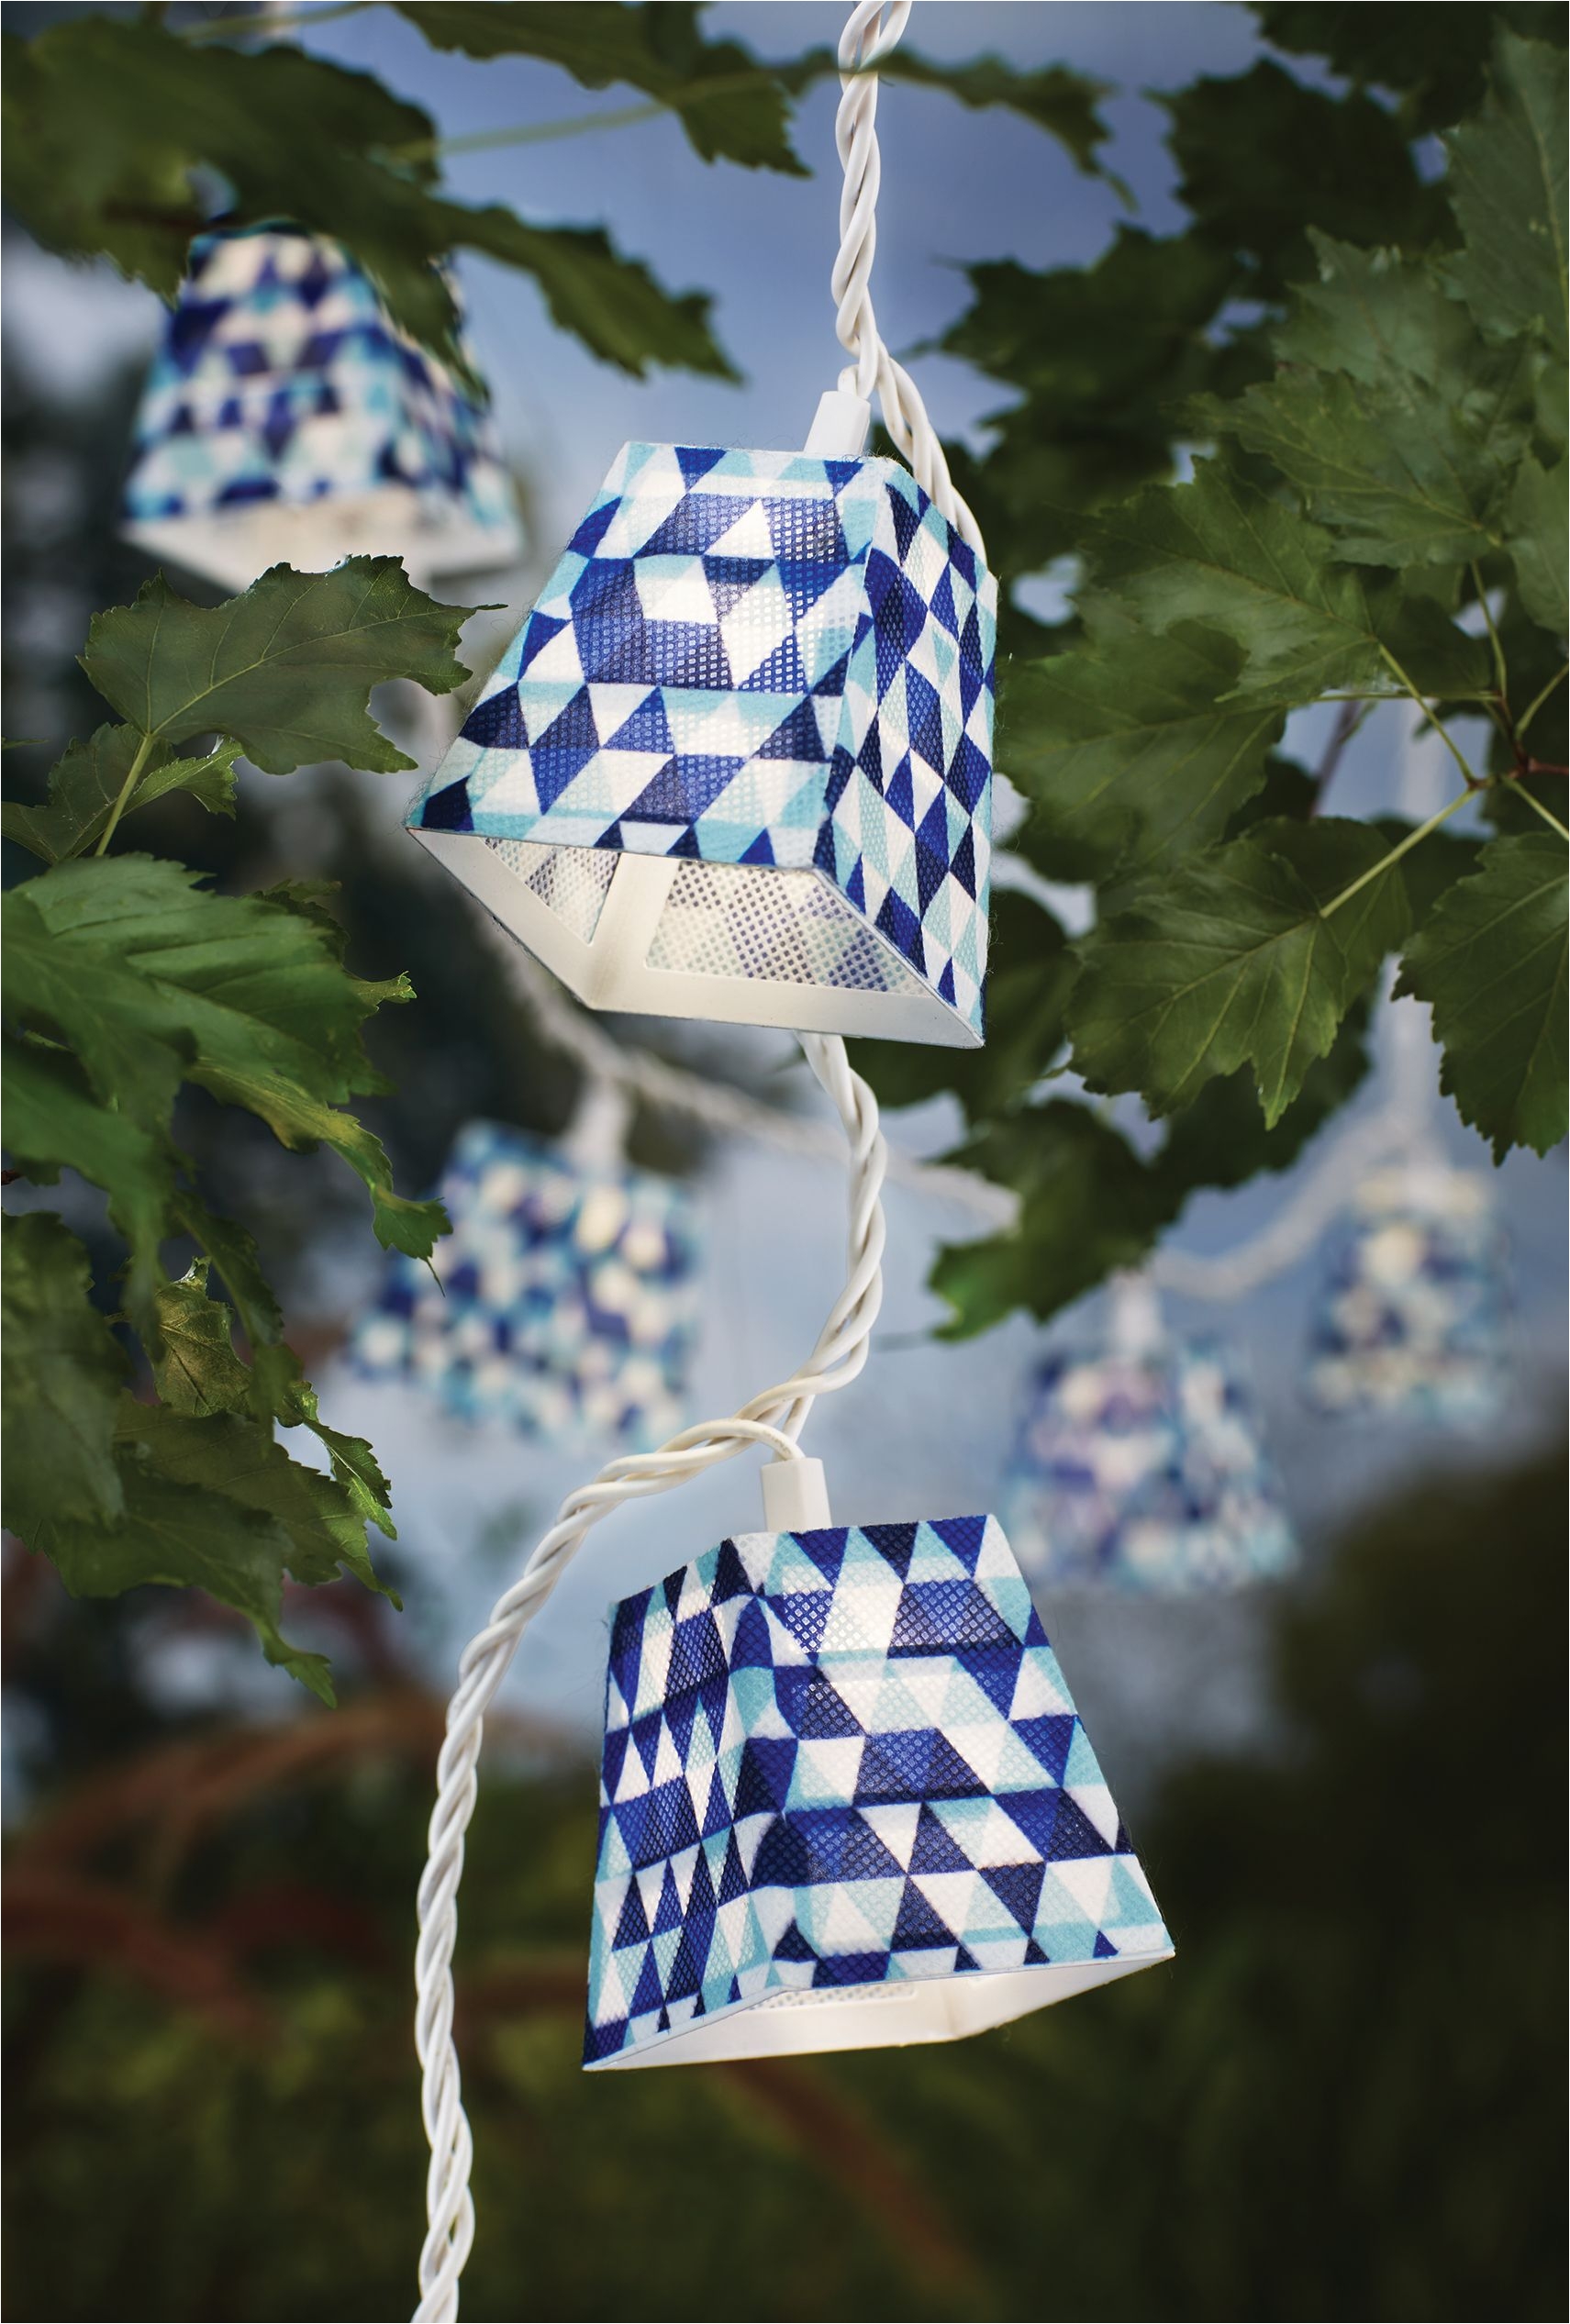 light up your patio deck living room or dorm room with the sweet little cubes on the 10ct printed fabric light set decorative mini string lights bring